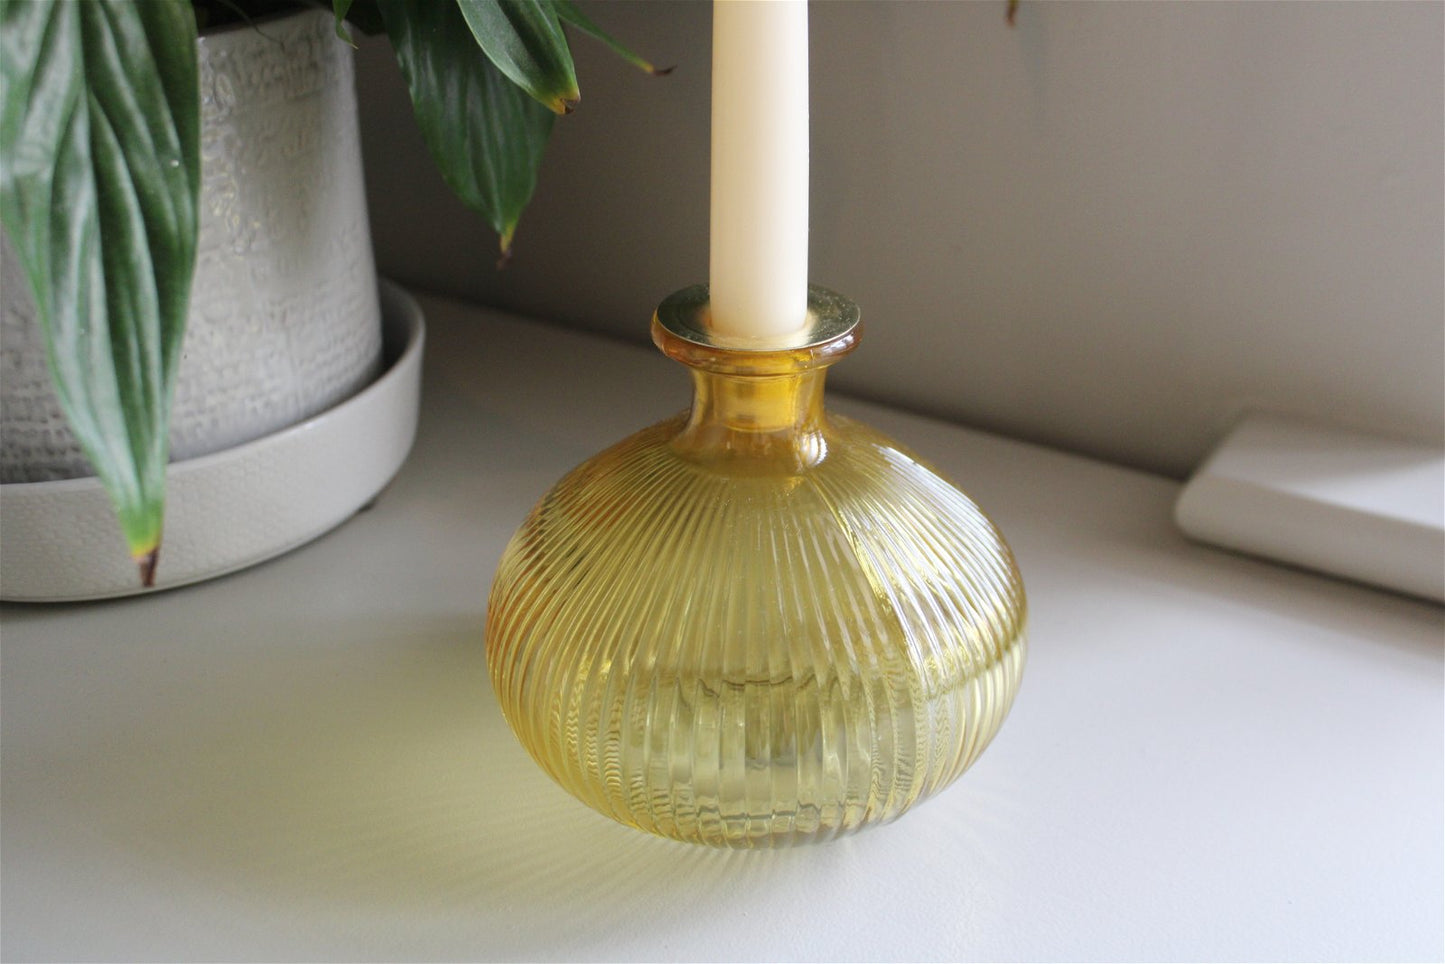 Yellow Ribbed Glass Candle Holder - a Cheeky Plant